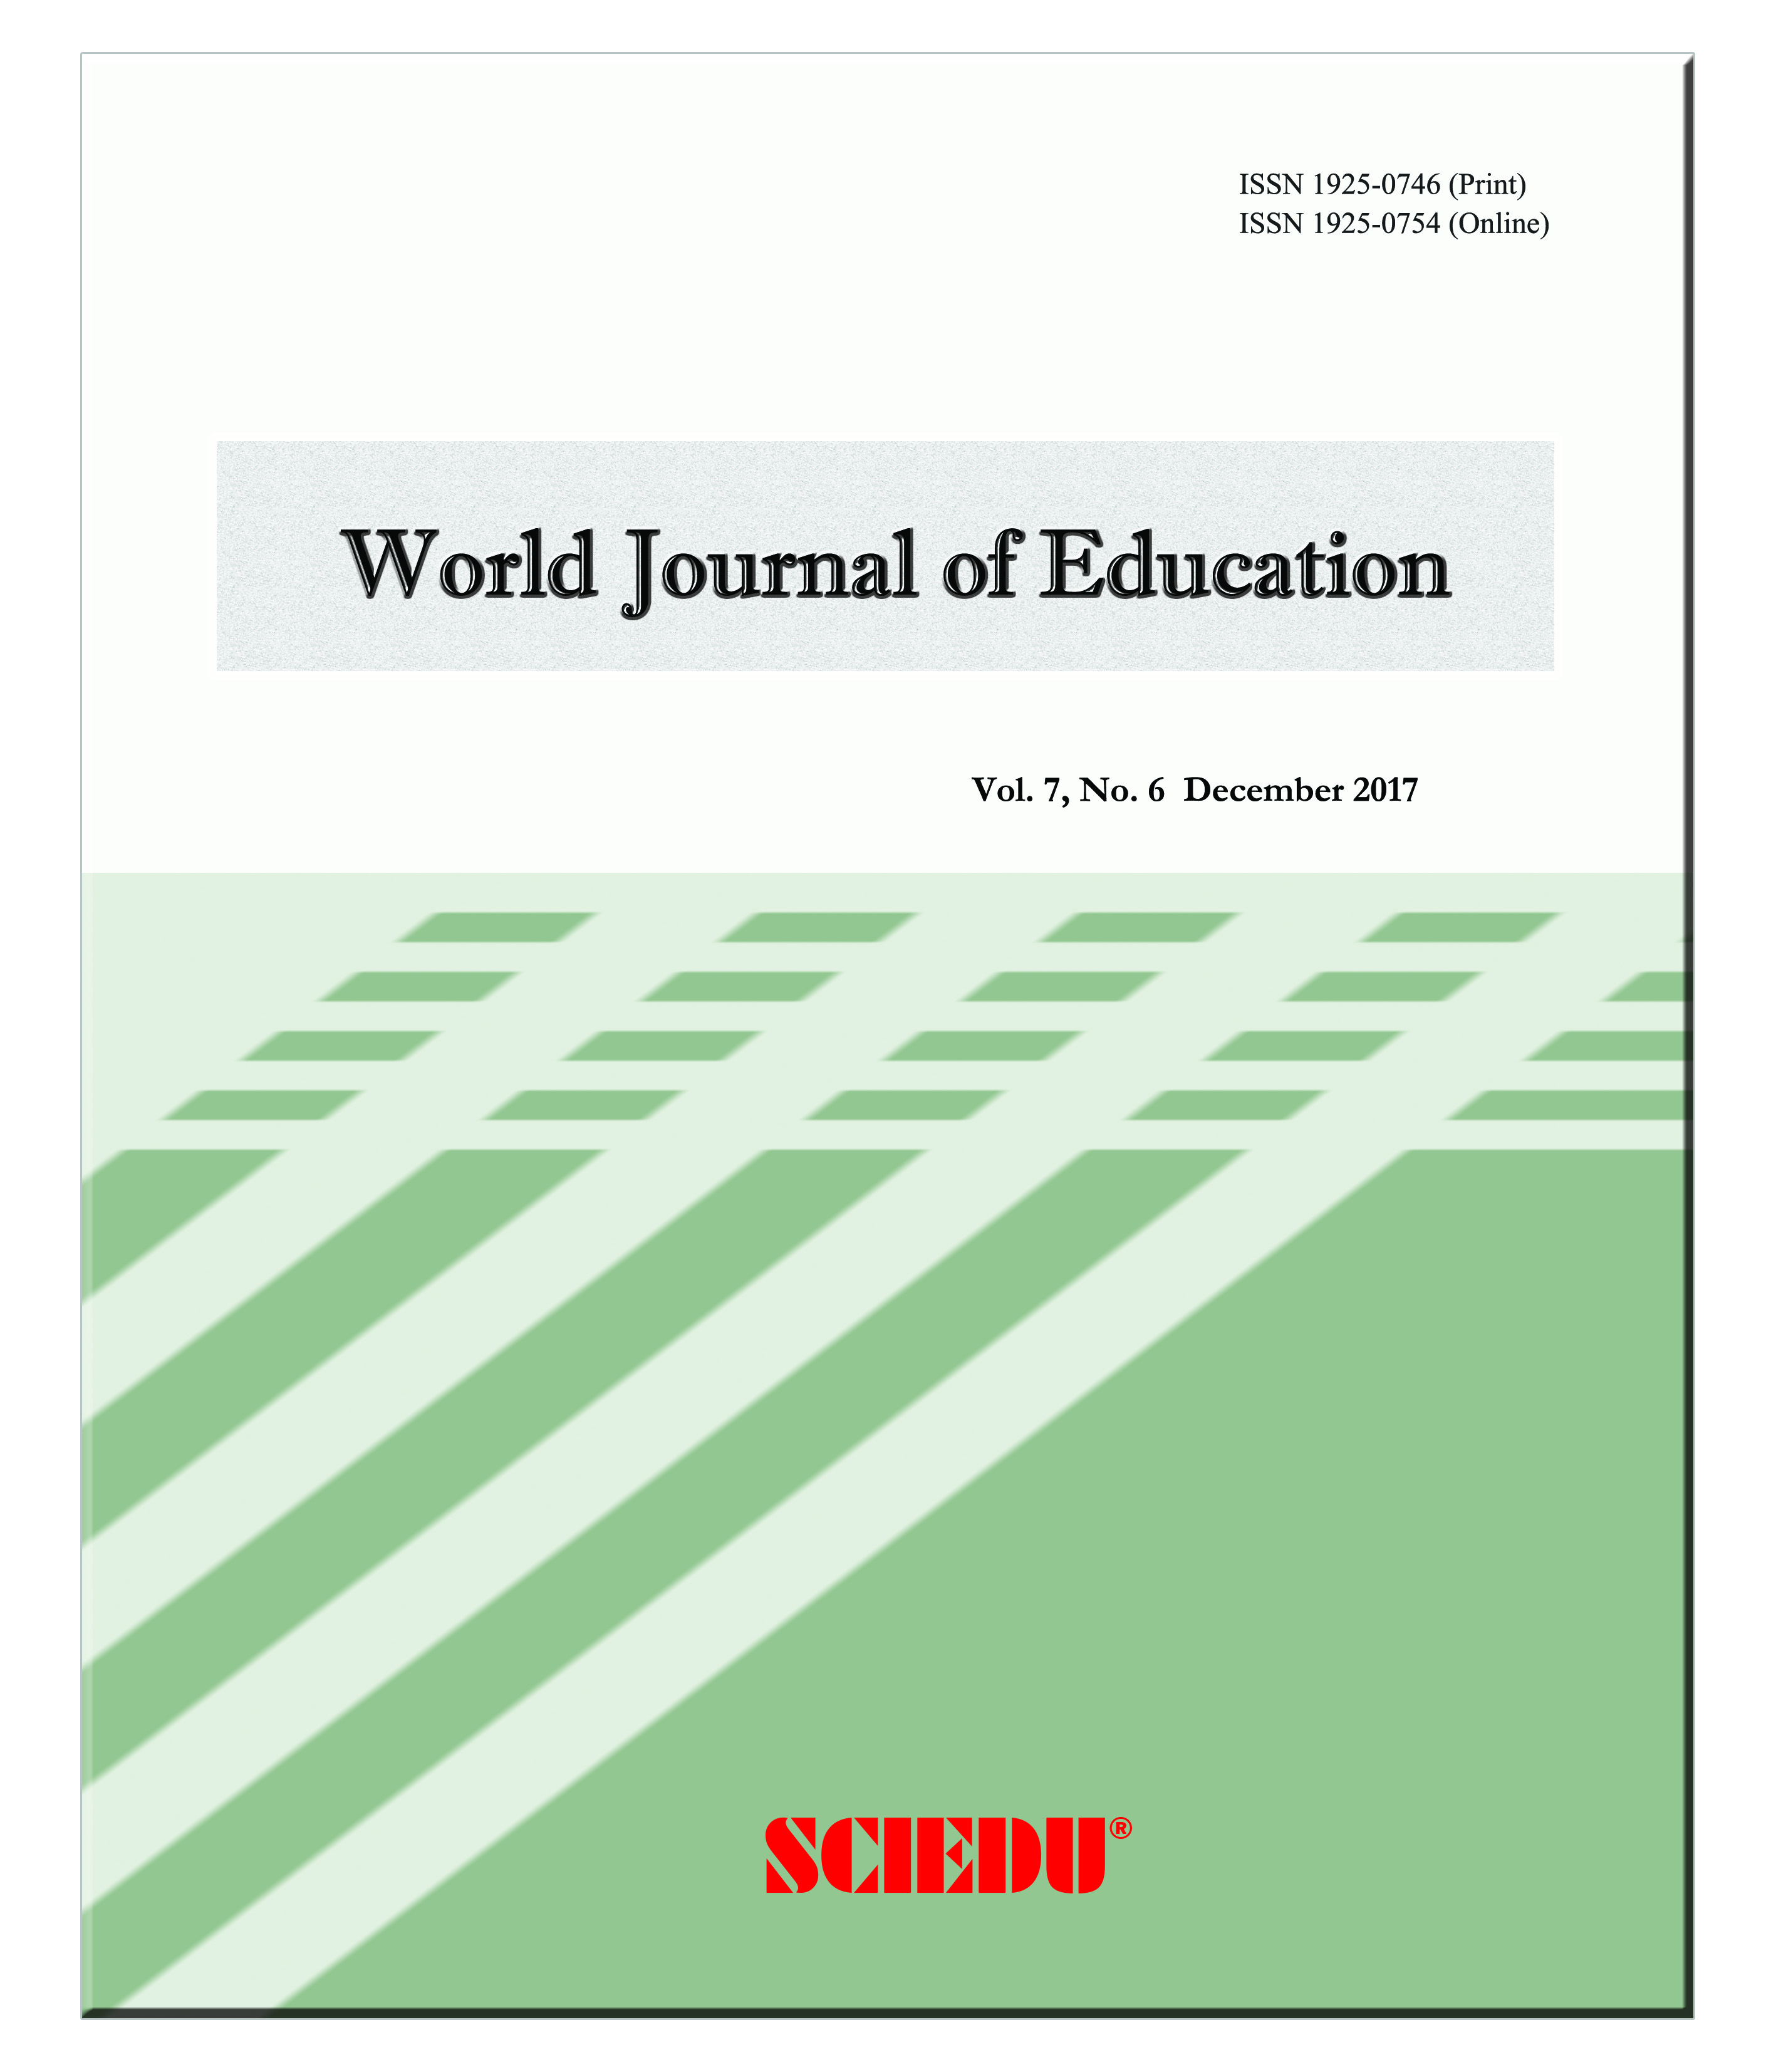 education level journal article